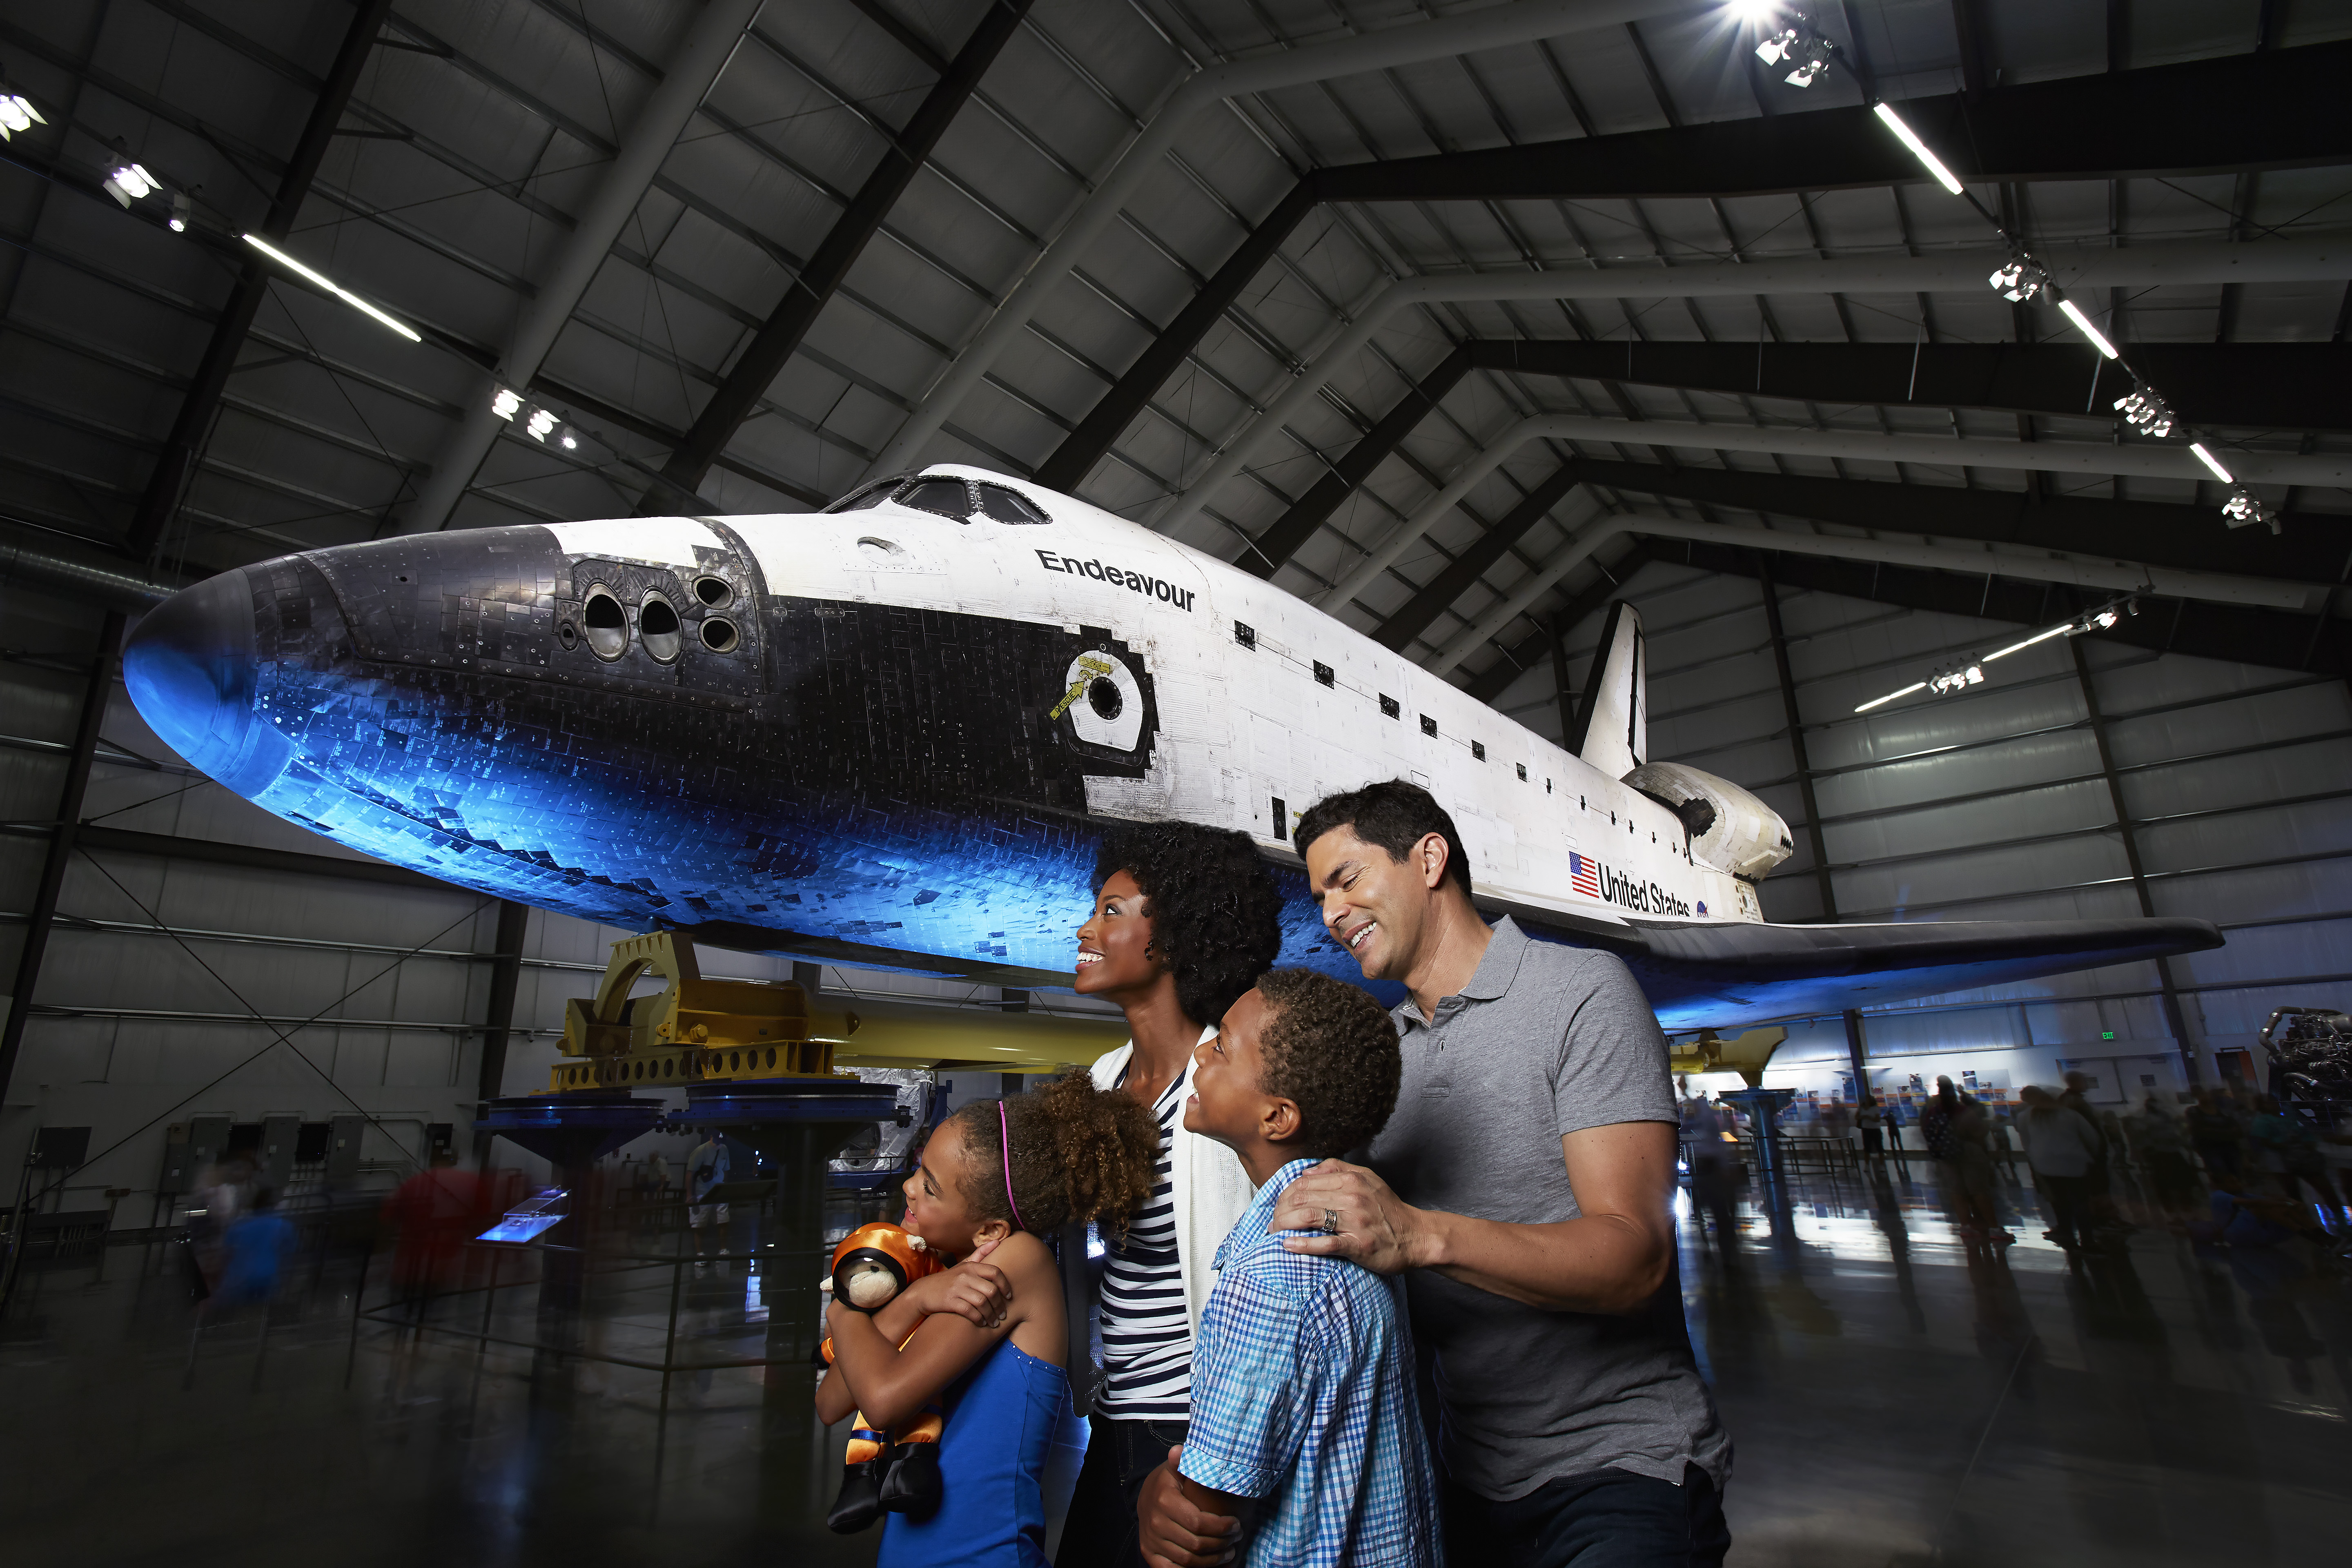 A diverse family group enjoys the space shuttle Endeavour display in the Samuel Oschin Pavilion.